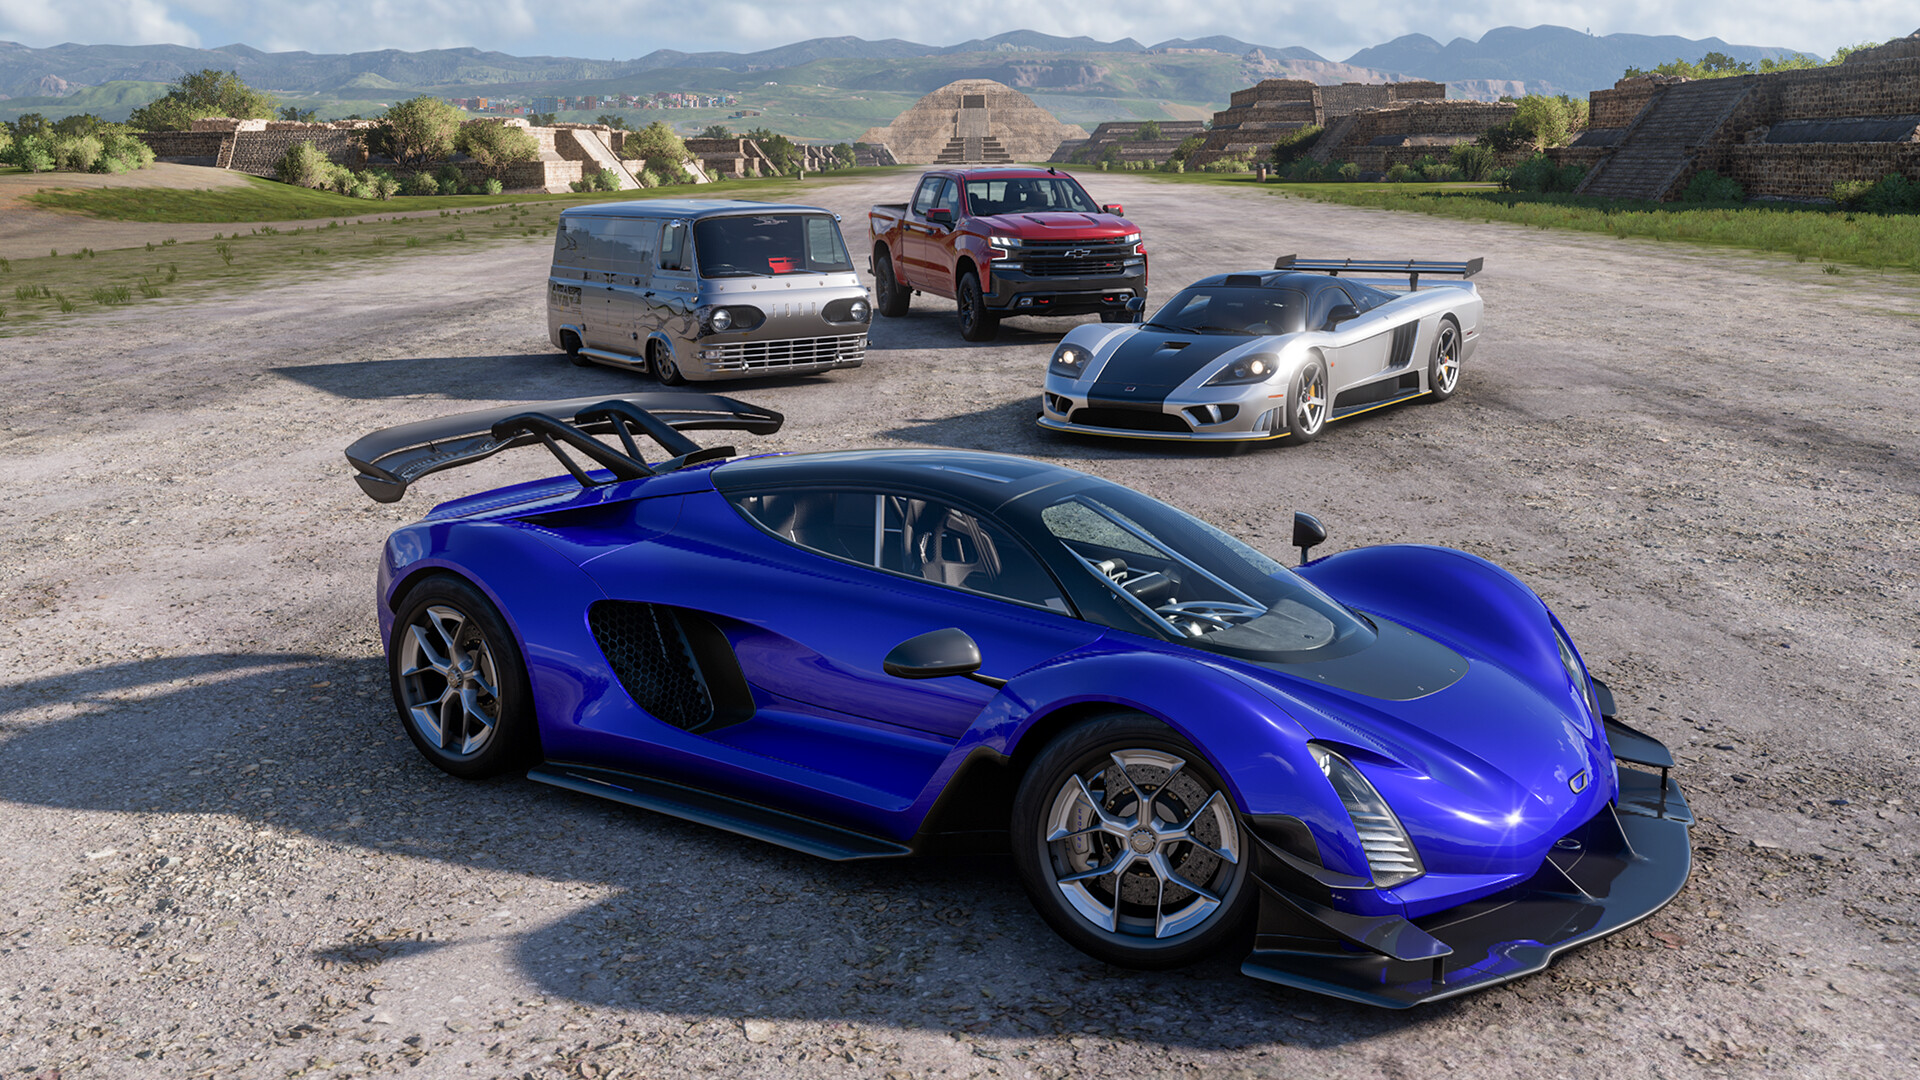 Forza Horizon 5 Fast X Car Pack on Steam